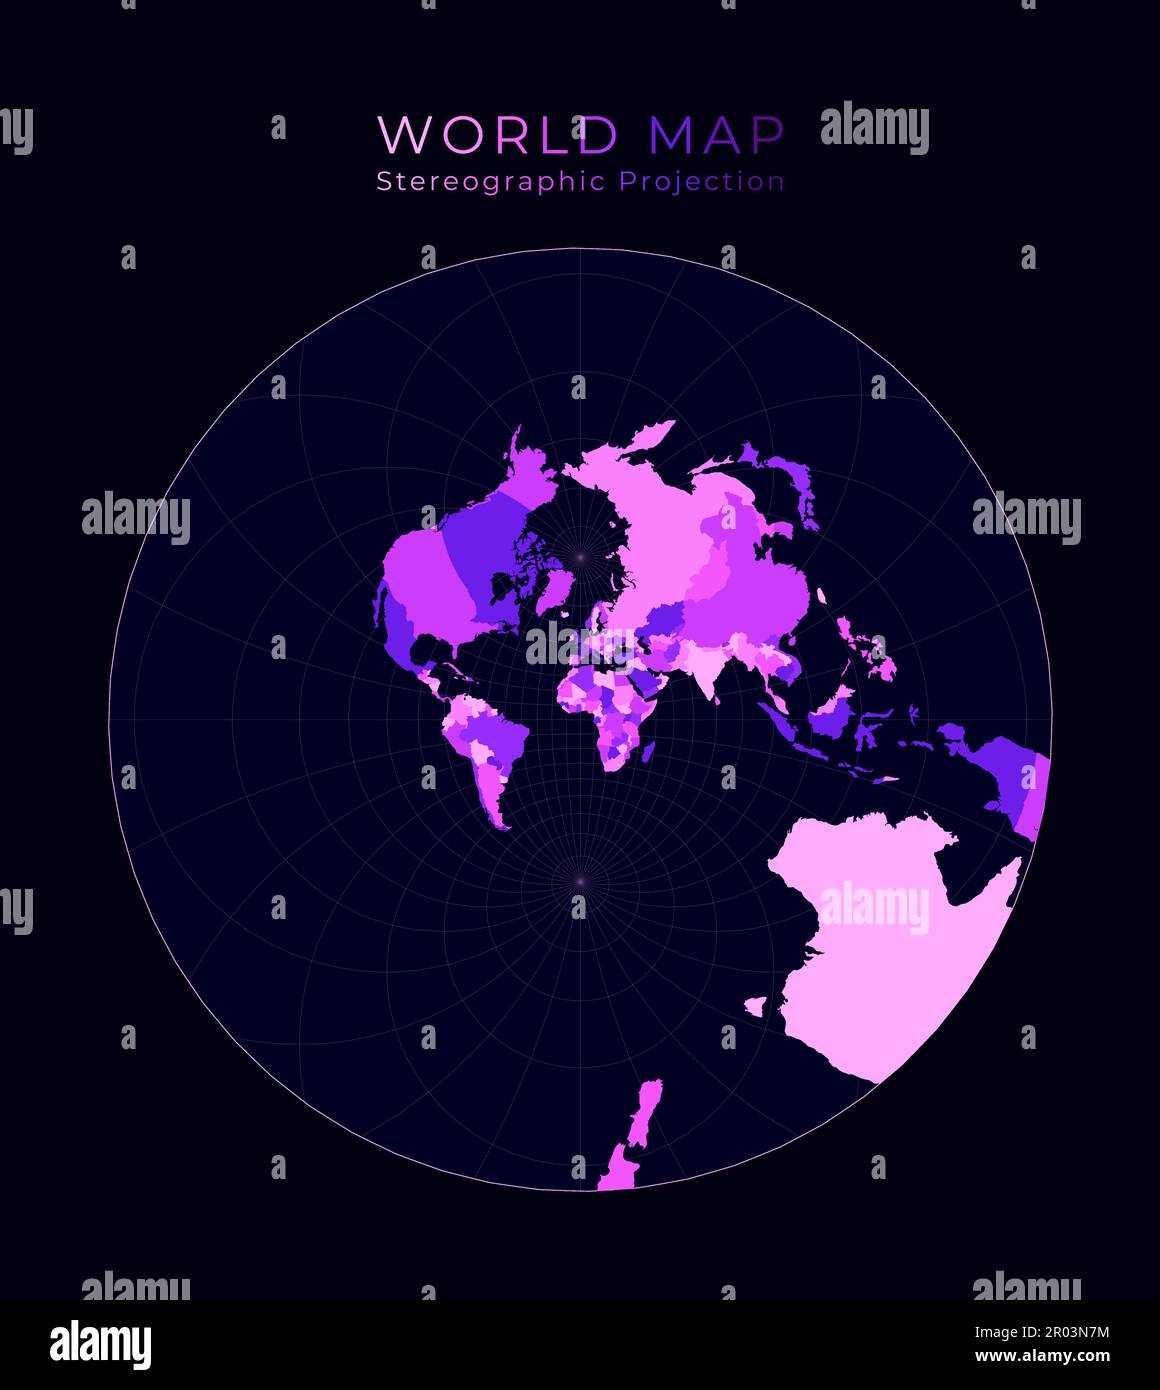 World Map Stereographic Digital World Illustration Bright Pink Neon Colors On Dark Background 4393